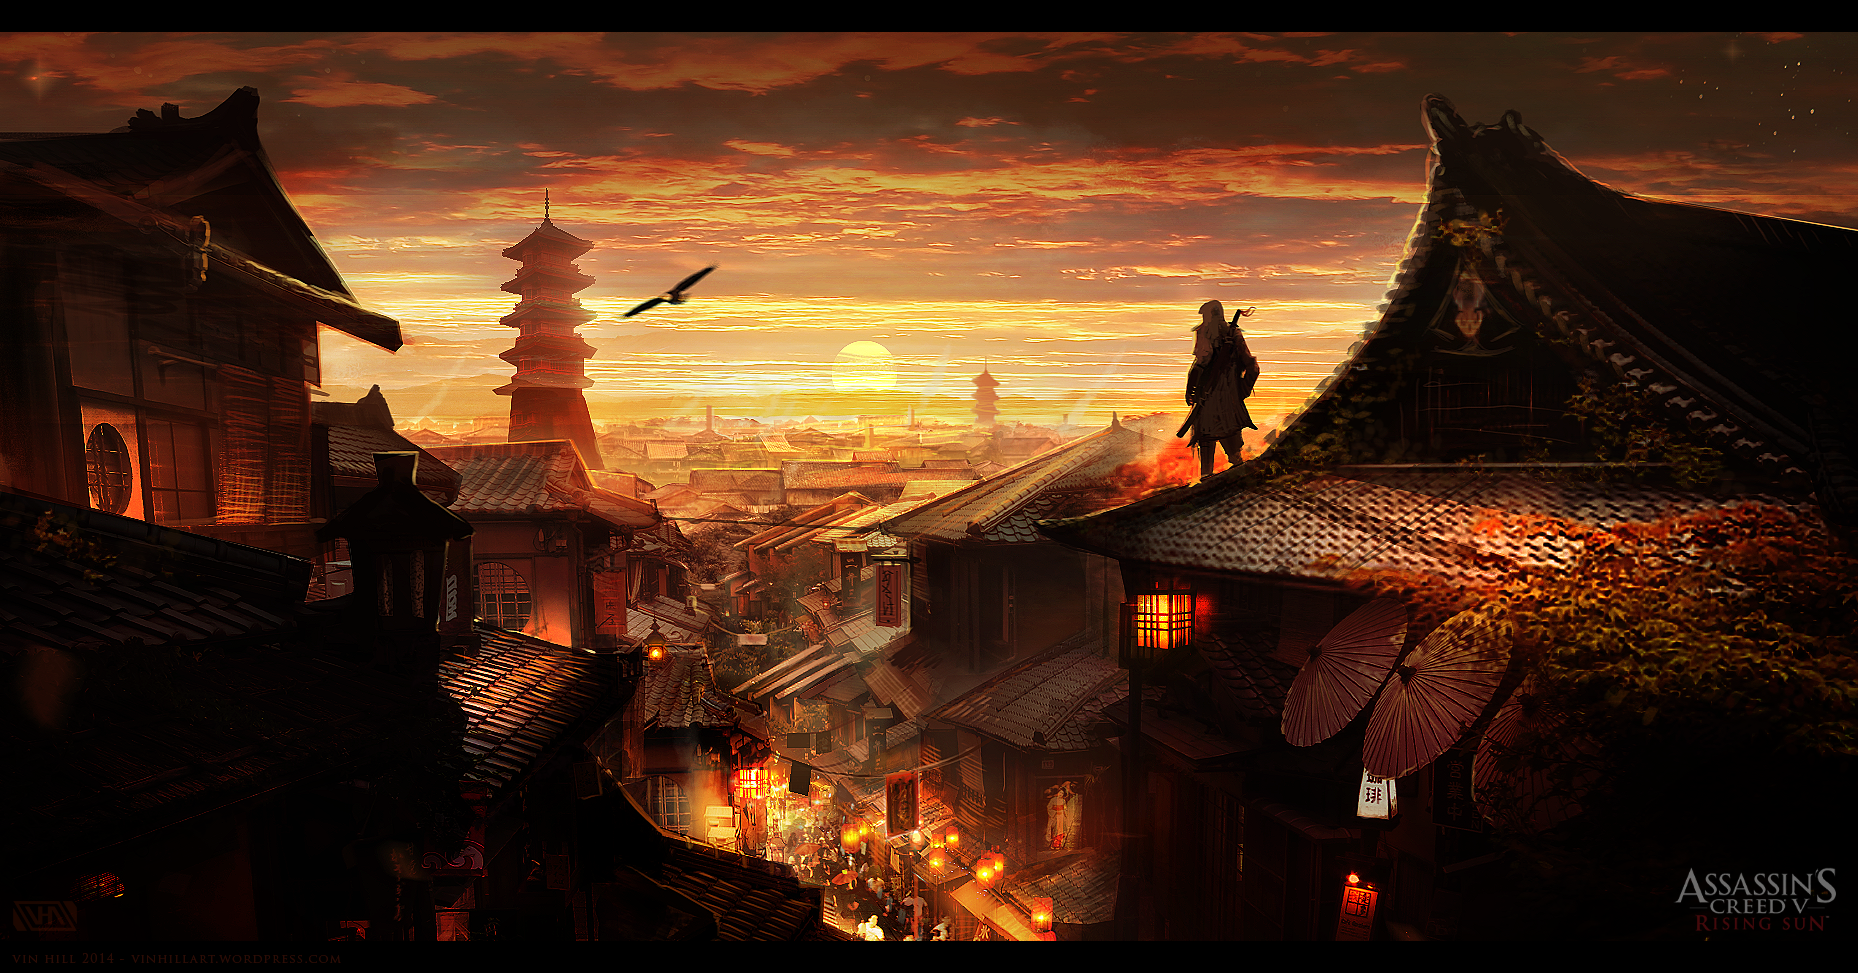 What A Japanese Assassin’s Creed Could Look Like